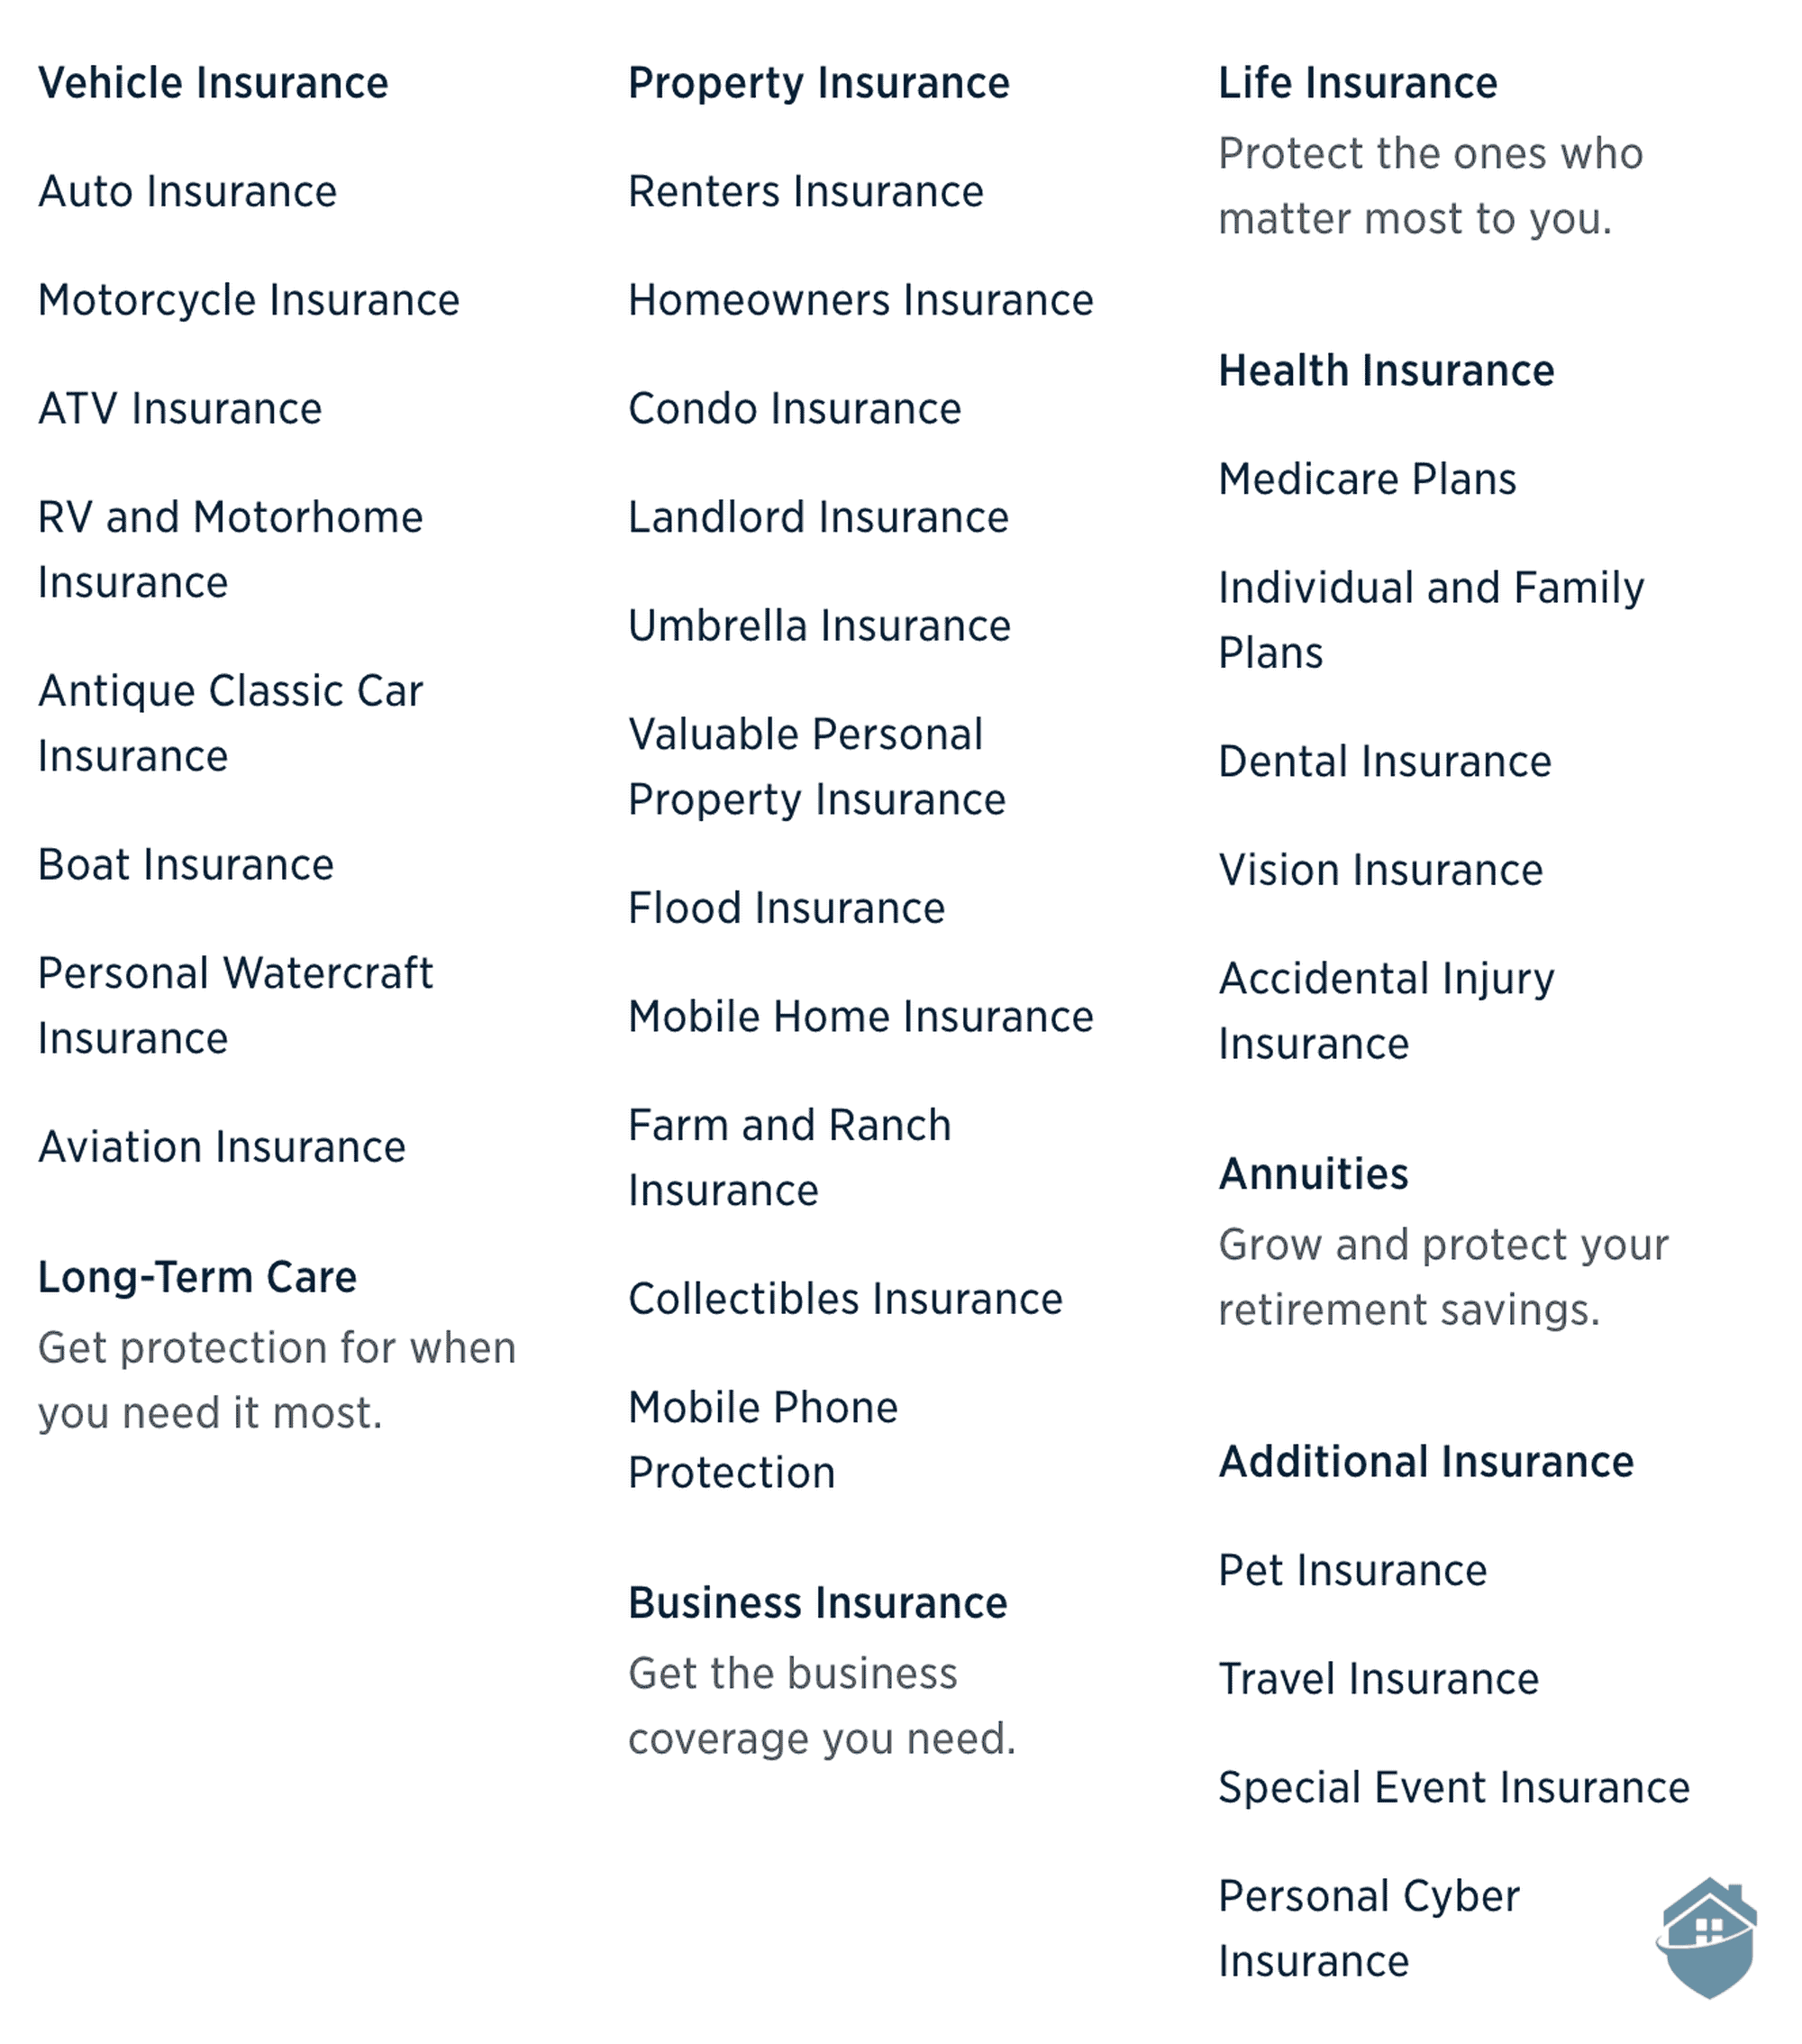 Other types of insurance offered by USAA